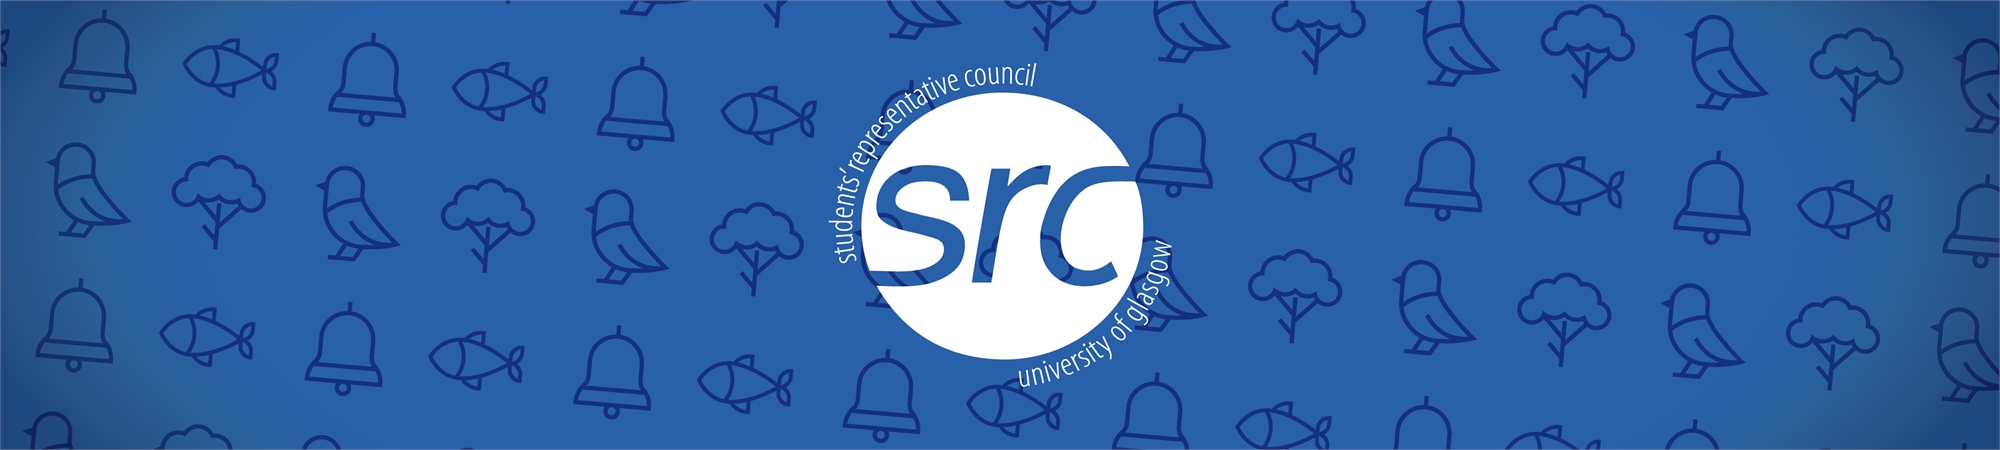 Learn more about the SRC - Students' Representative Council